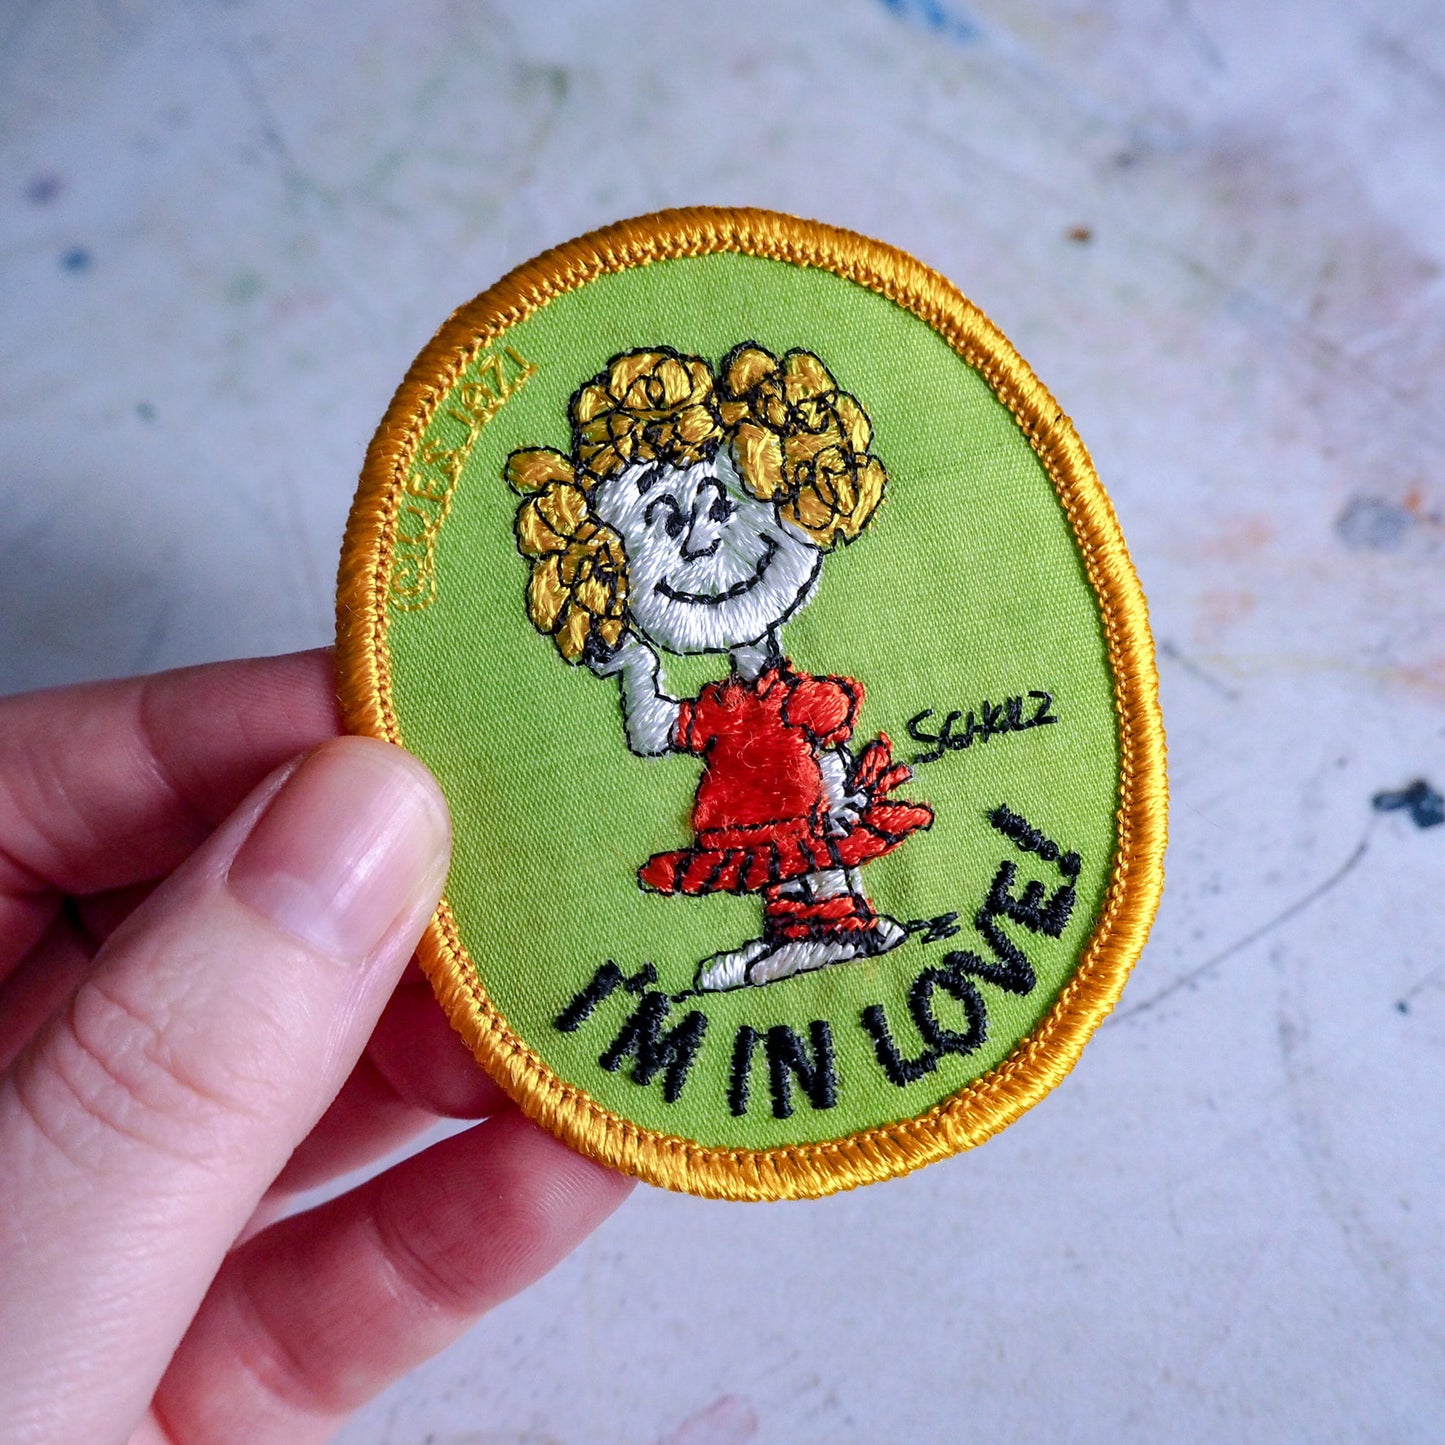 Vintage 1971 Peanuts ‘I’m in Love!’ Patch